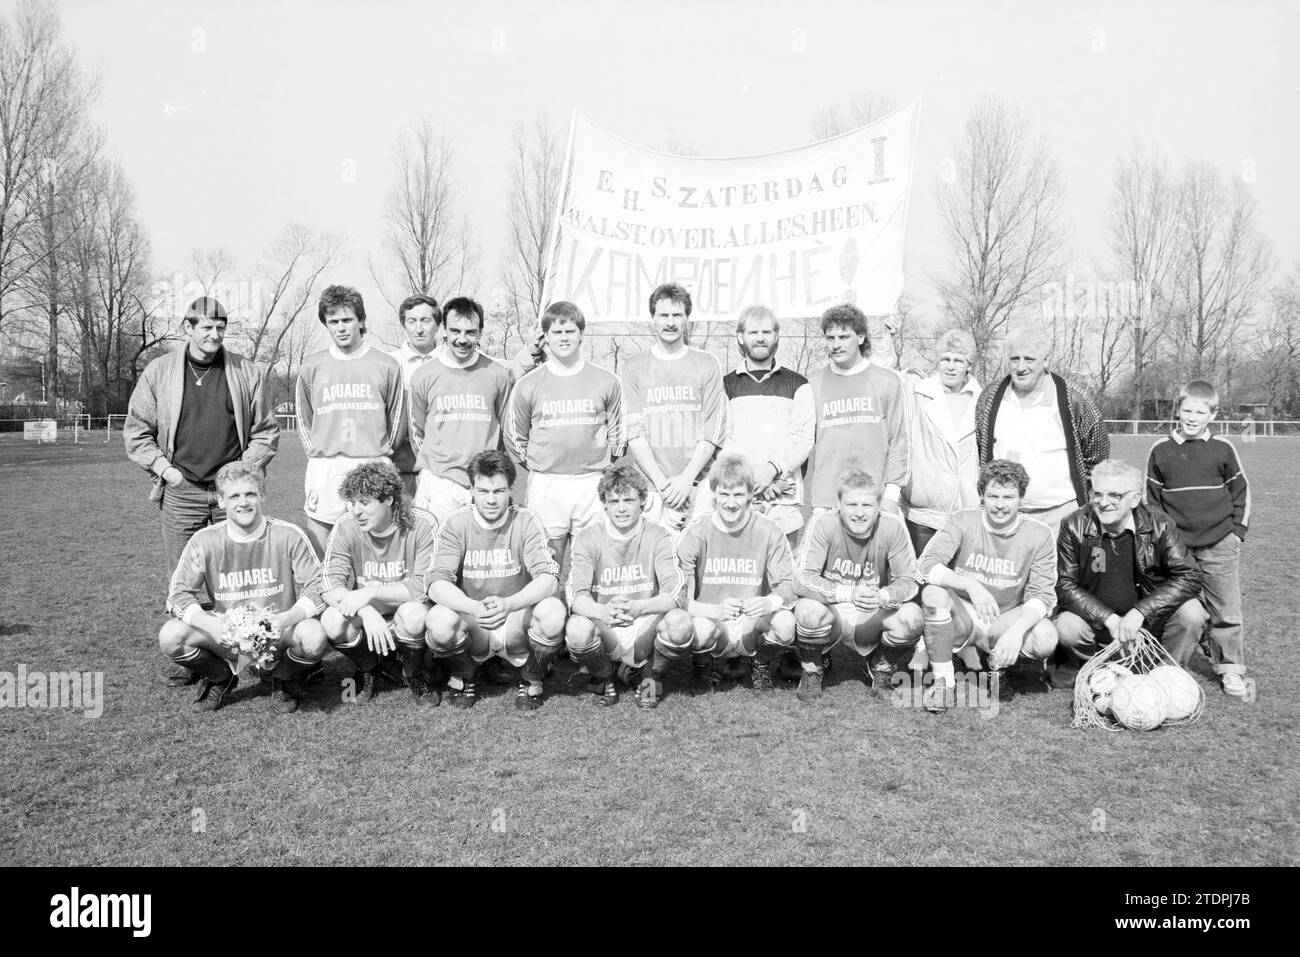 Champion team EHS, Football EHS, 01-04-1988, Whizgle News from the Past, Tailored for the Future. Explore historical narratives, Dutch The Netherlands agency image with a modern perspective, bridging the gap between yesterday's events and tomorrow's insights. A timeless journey shaping the stories that shape our future Stock Photo